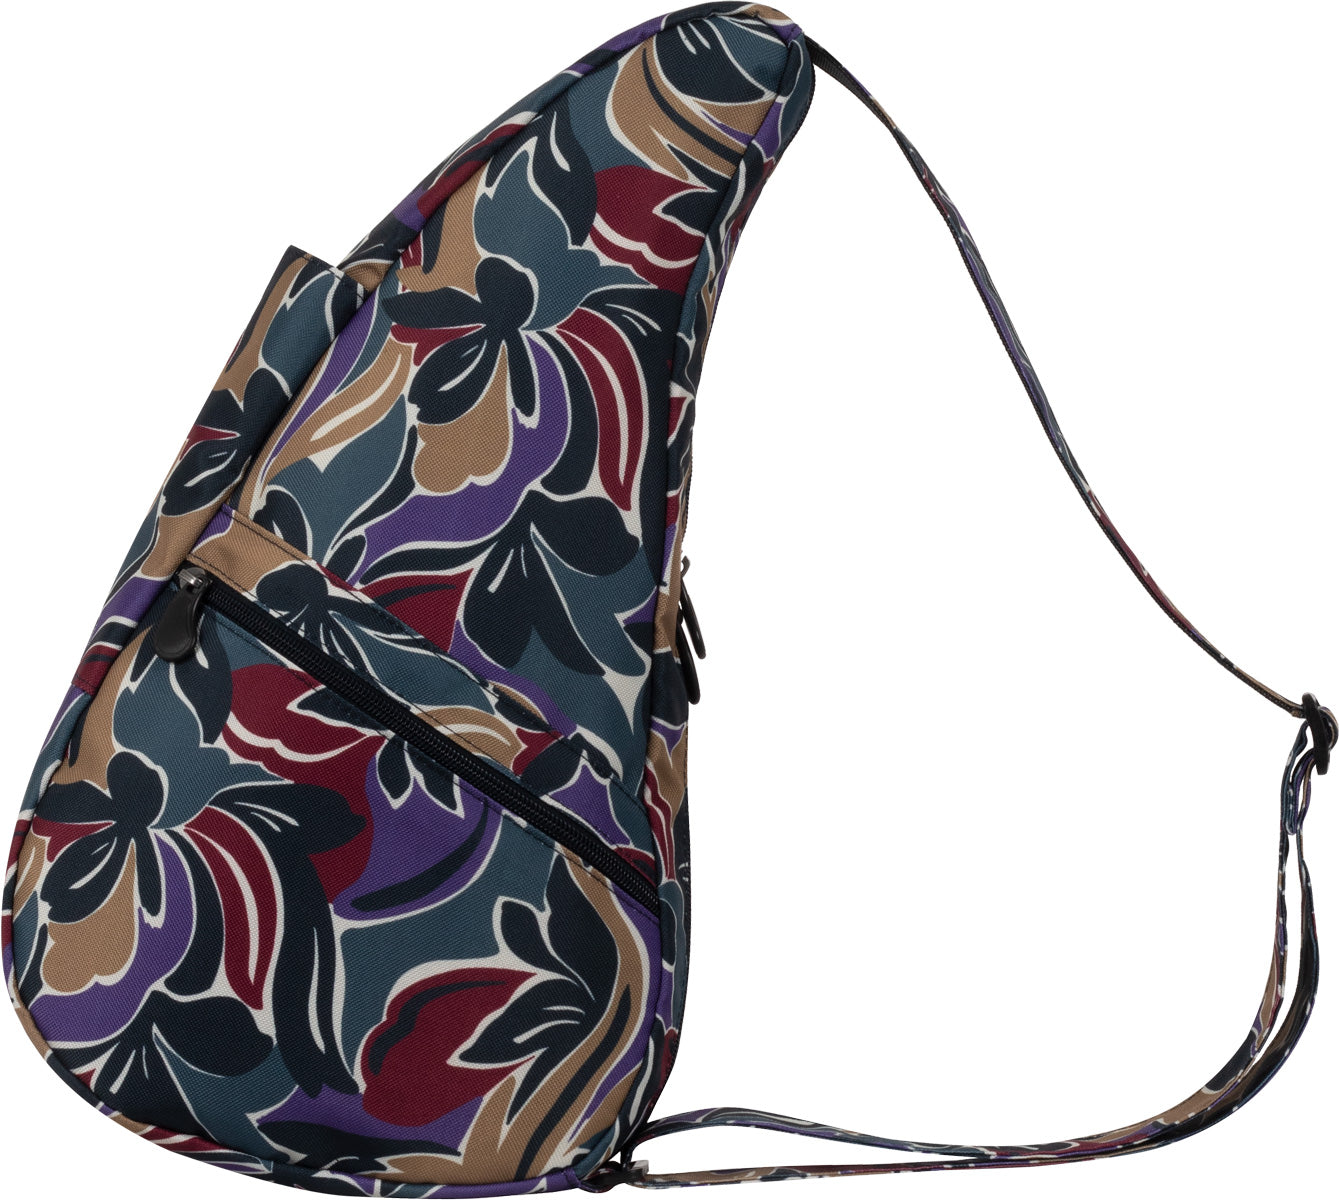 AmeriBag Small Healthy Back Bag Tote Prints and Patterns (Twilight)